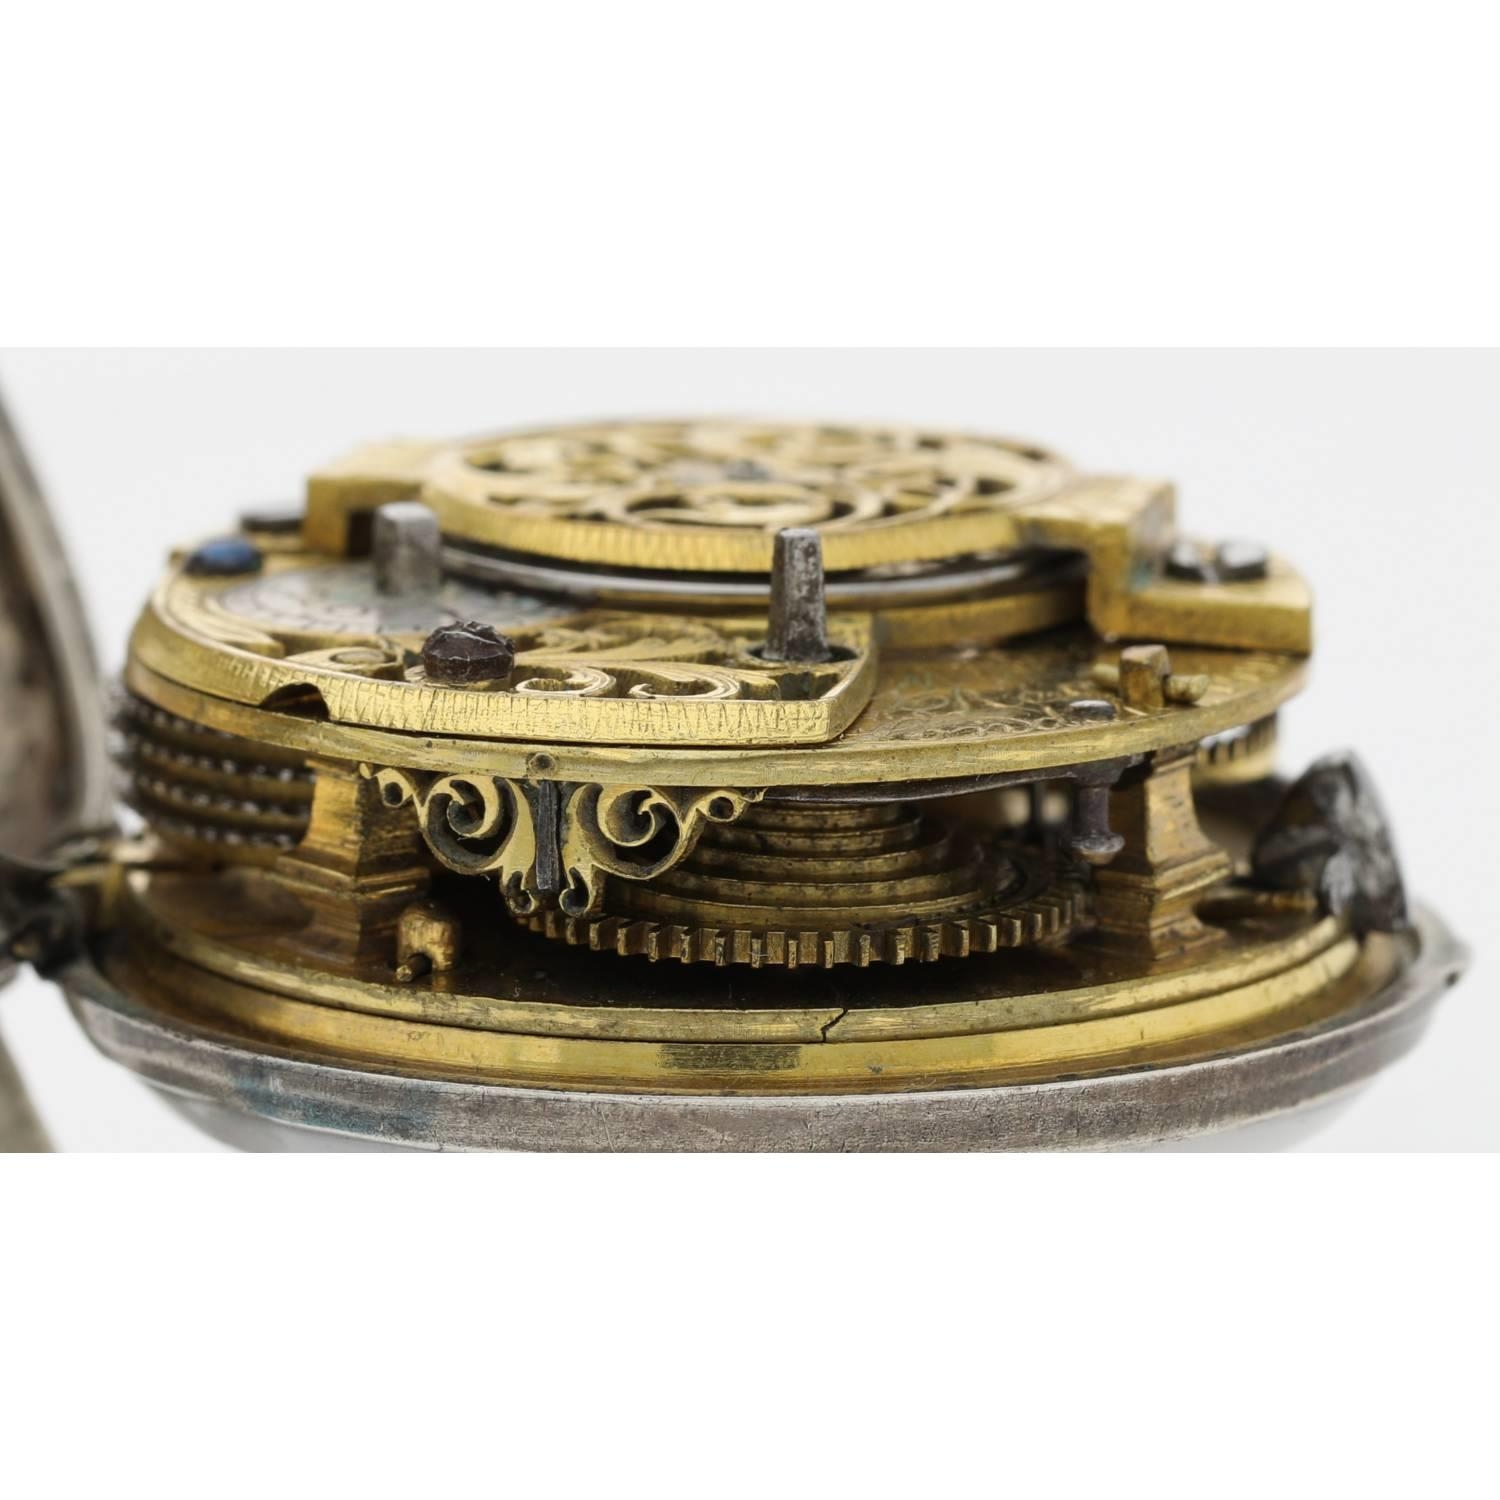 Mich Reanes, London - English 18th century repoussé silver pair cased verge pocket watch, London - Image 5 of 10